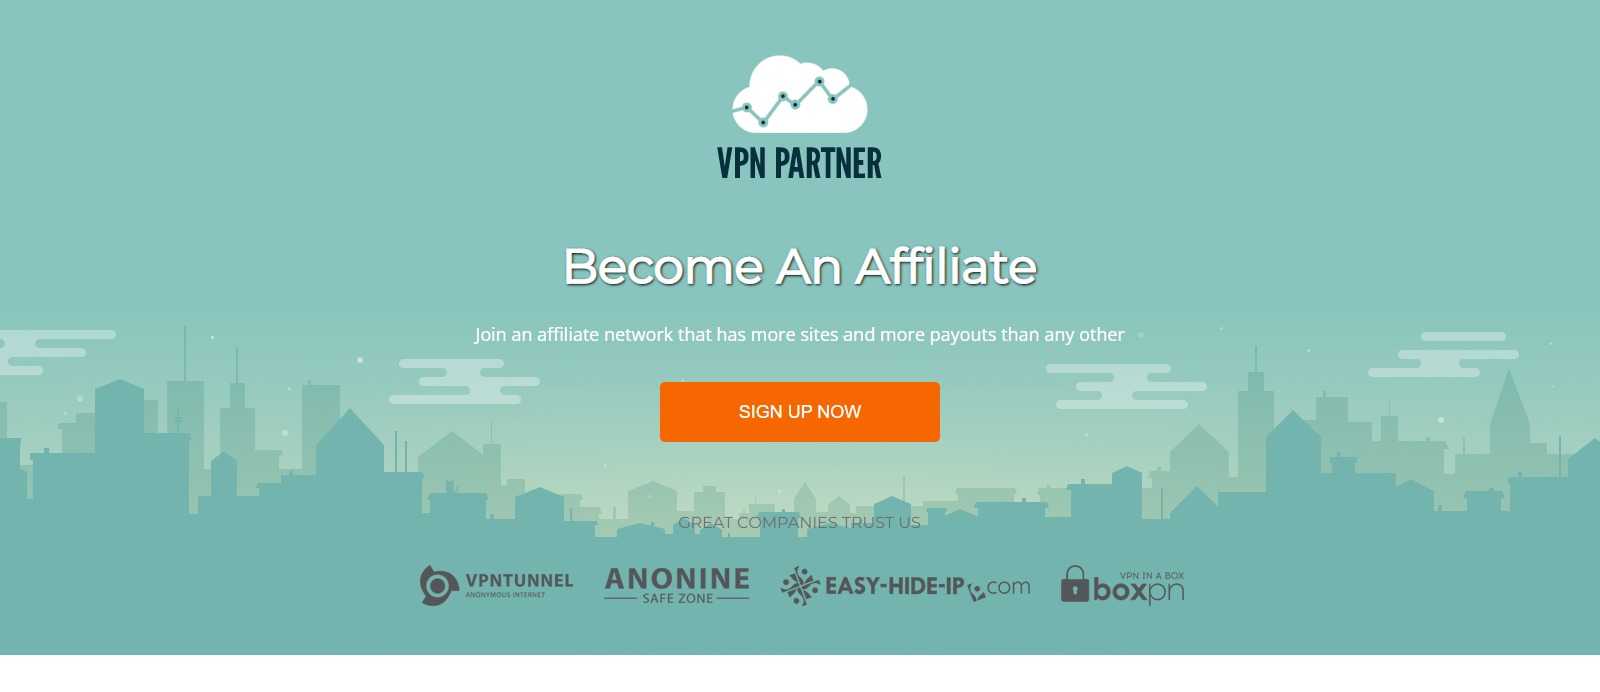 VPN Partner Affiliate Program Review: More Payouts Than any Other